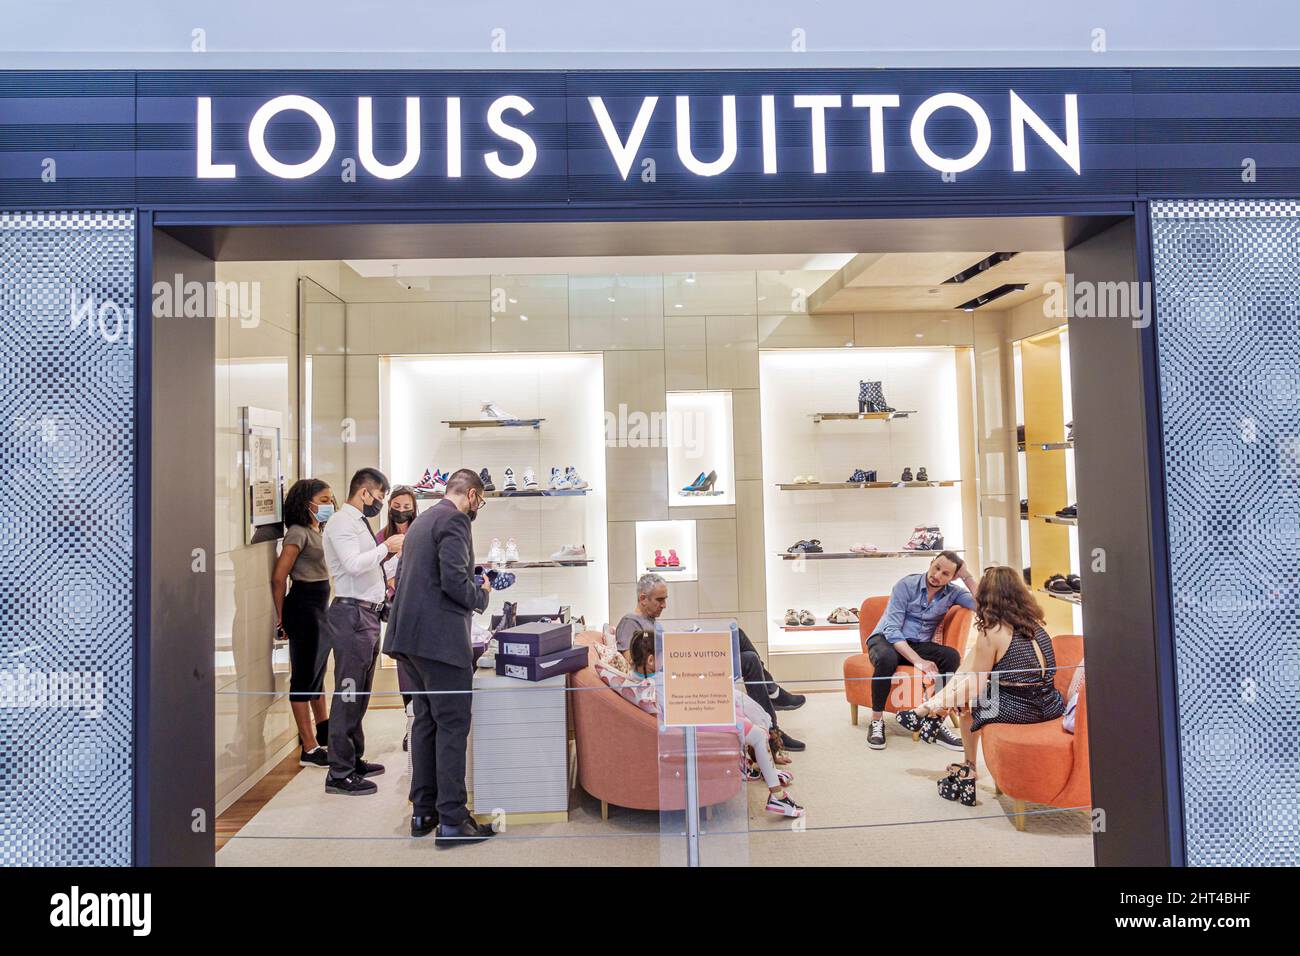 4K SAKS FIFTH AVENUE OUTLET SALE LOUIS VUITTON up to 70% OFF EVERY